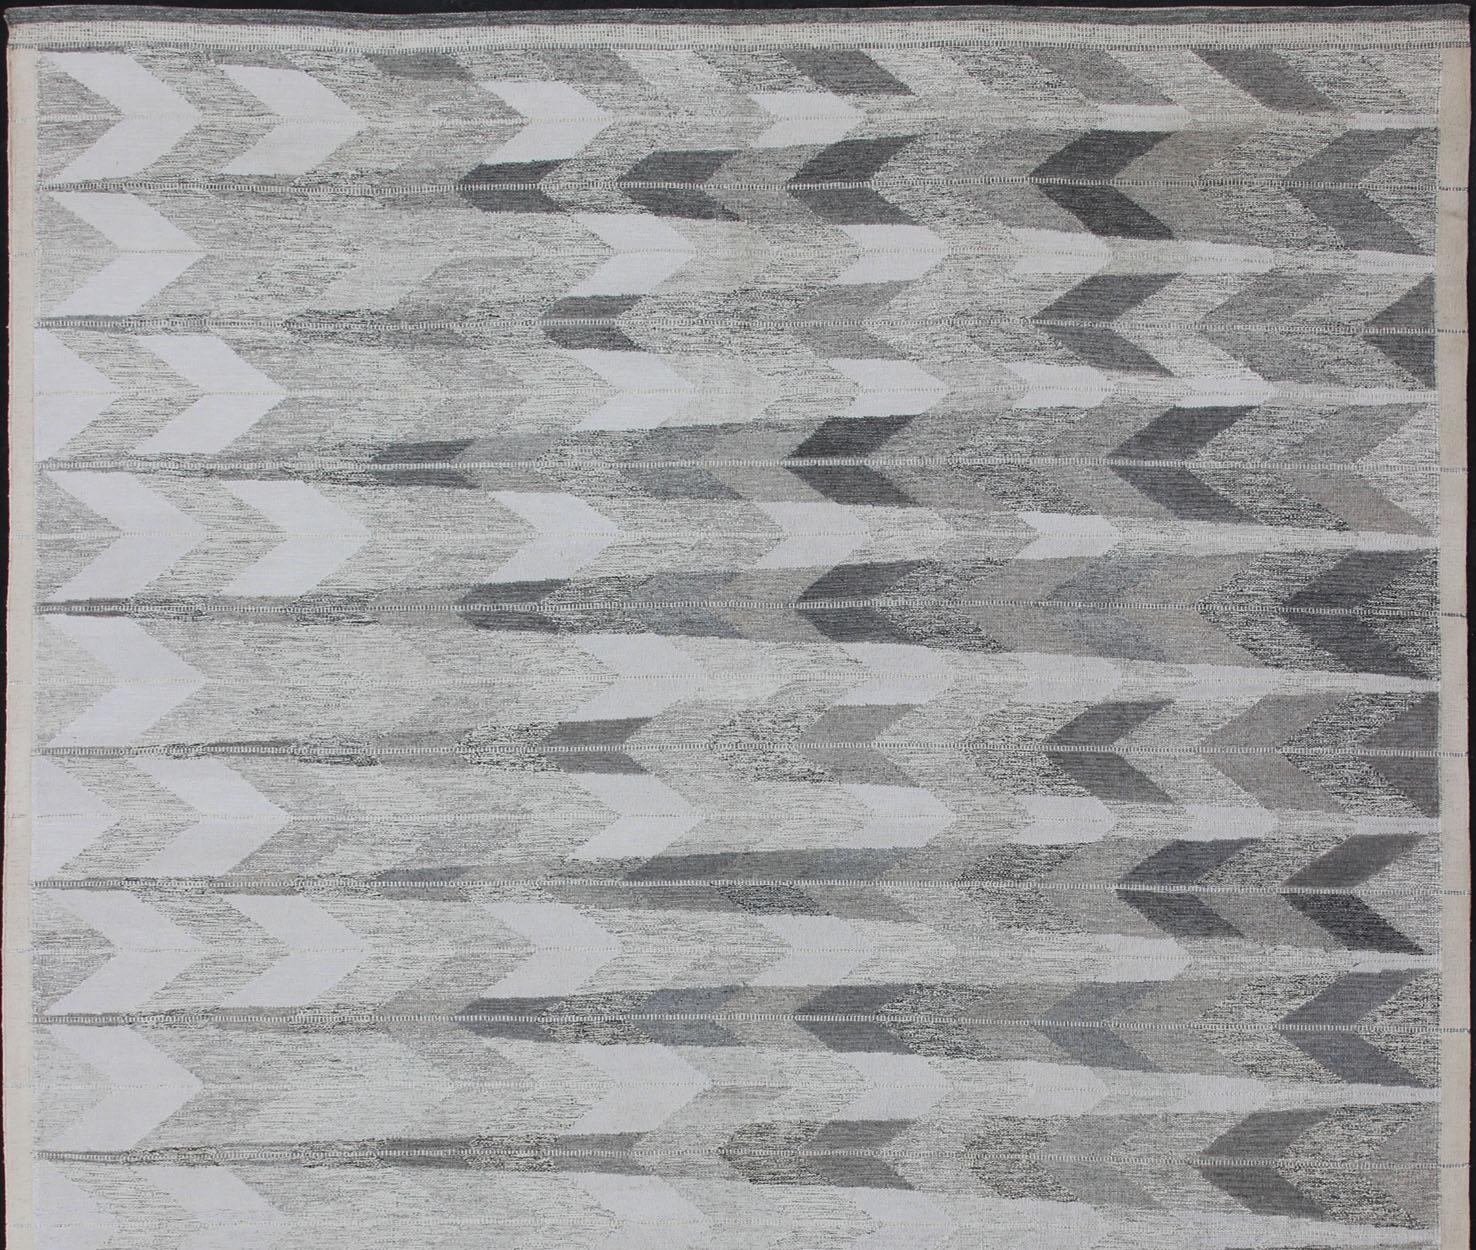 Large modern Scandinavian design flat weave rug /Swedish design flat-weave rug. Rug/KHN-1039-SW-105

This Scandinavian flat-weave patterned rug is inspired by the work of Swedish textile designers of the early to mid-20th century. With a unique